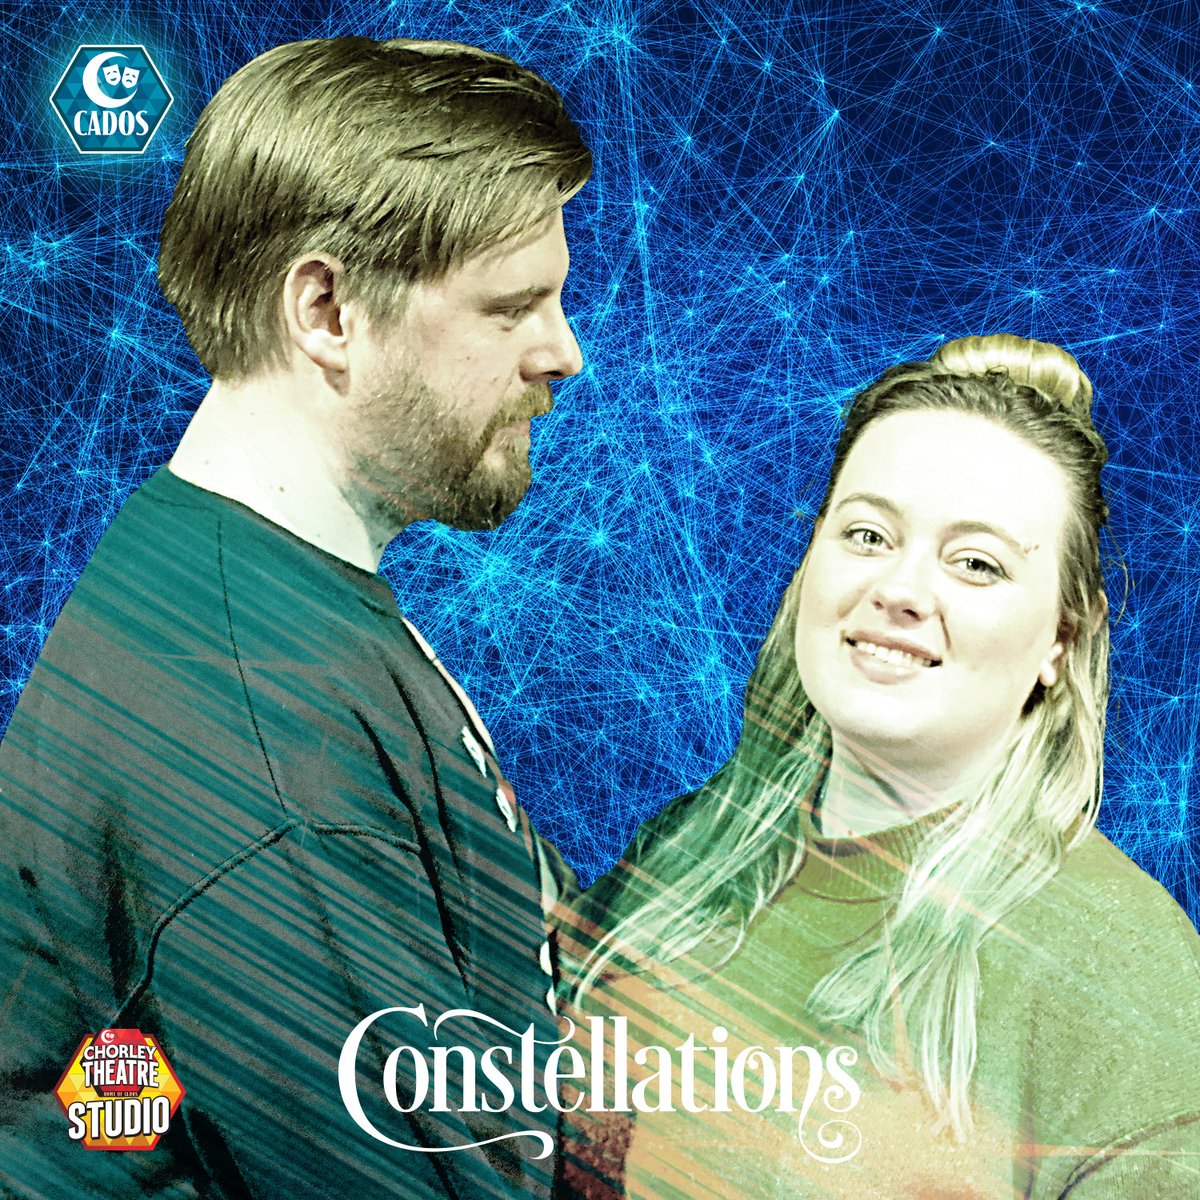 In our Studio for 4 nights from 8th May, Constellations is a romantic drama about the relationship between a beekeeper and a physicist and all the directions it could take. Tickets £8 ticketsource.co.uk/chorleytheatre…